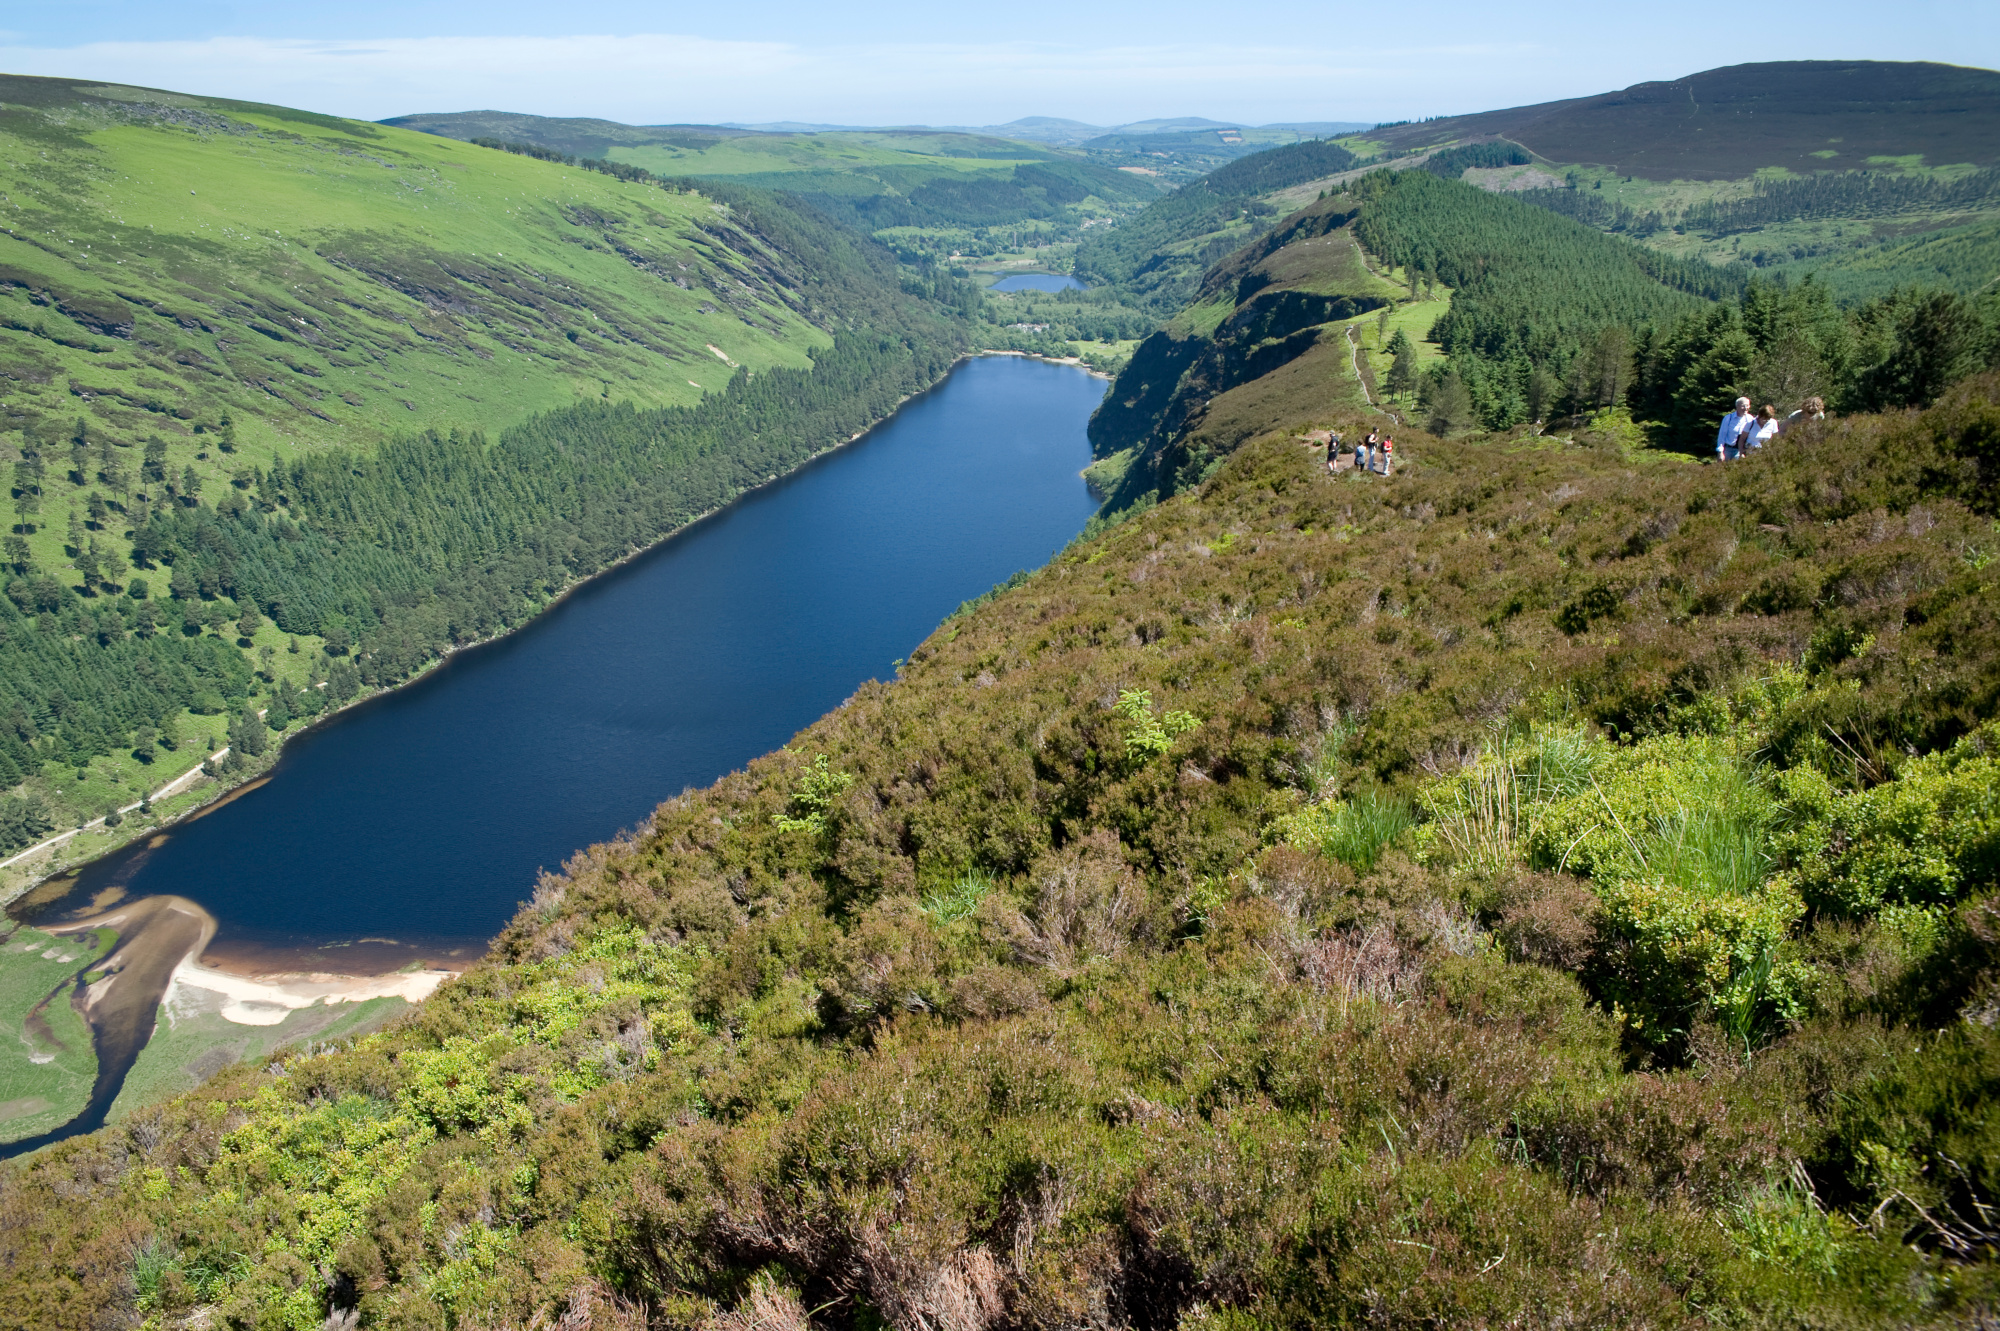 view of glendalough from the Spinc